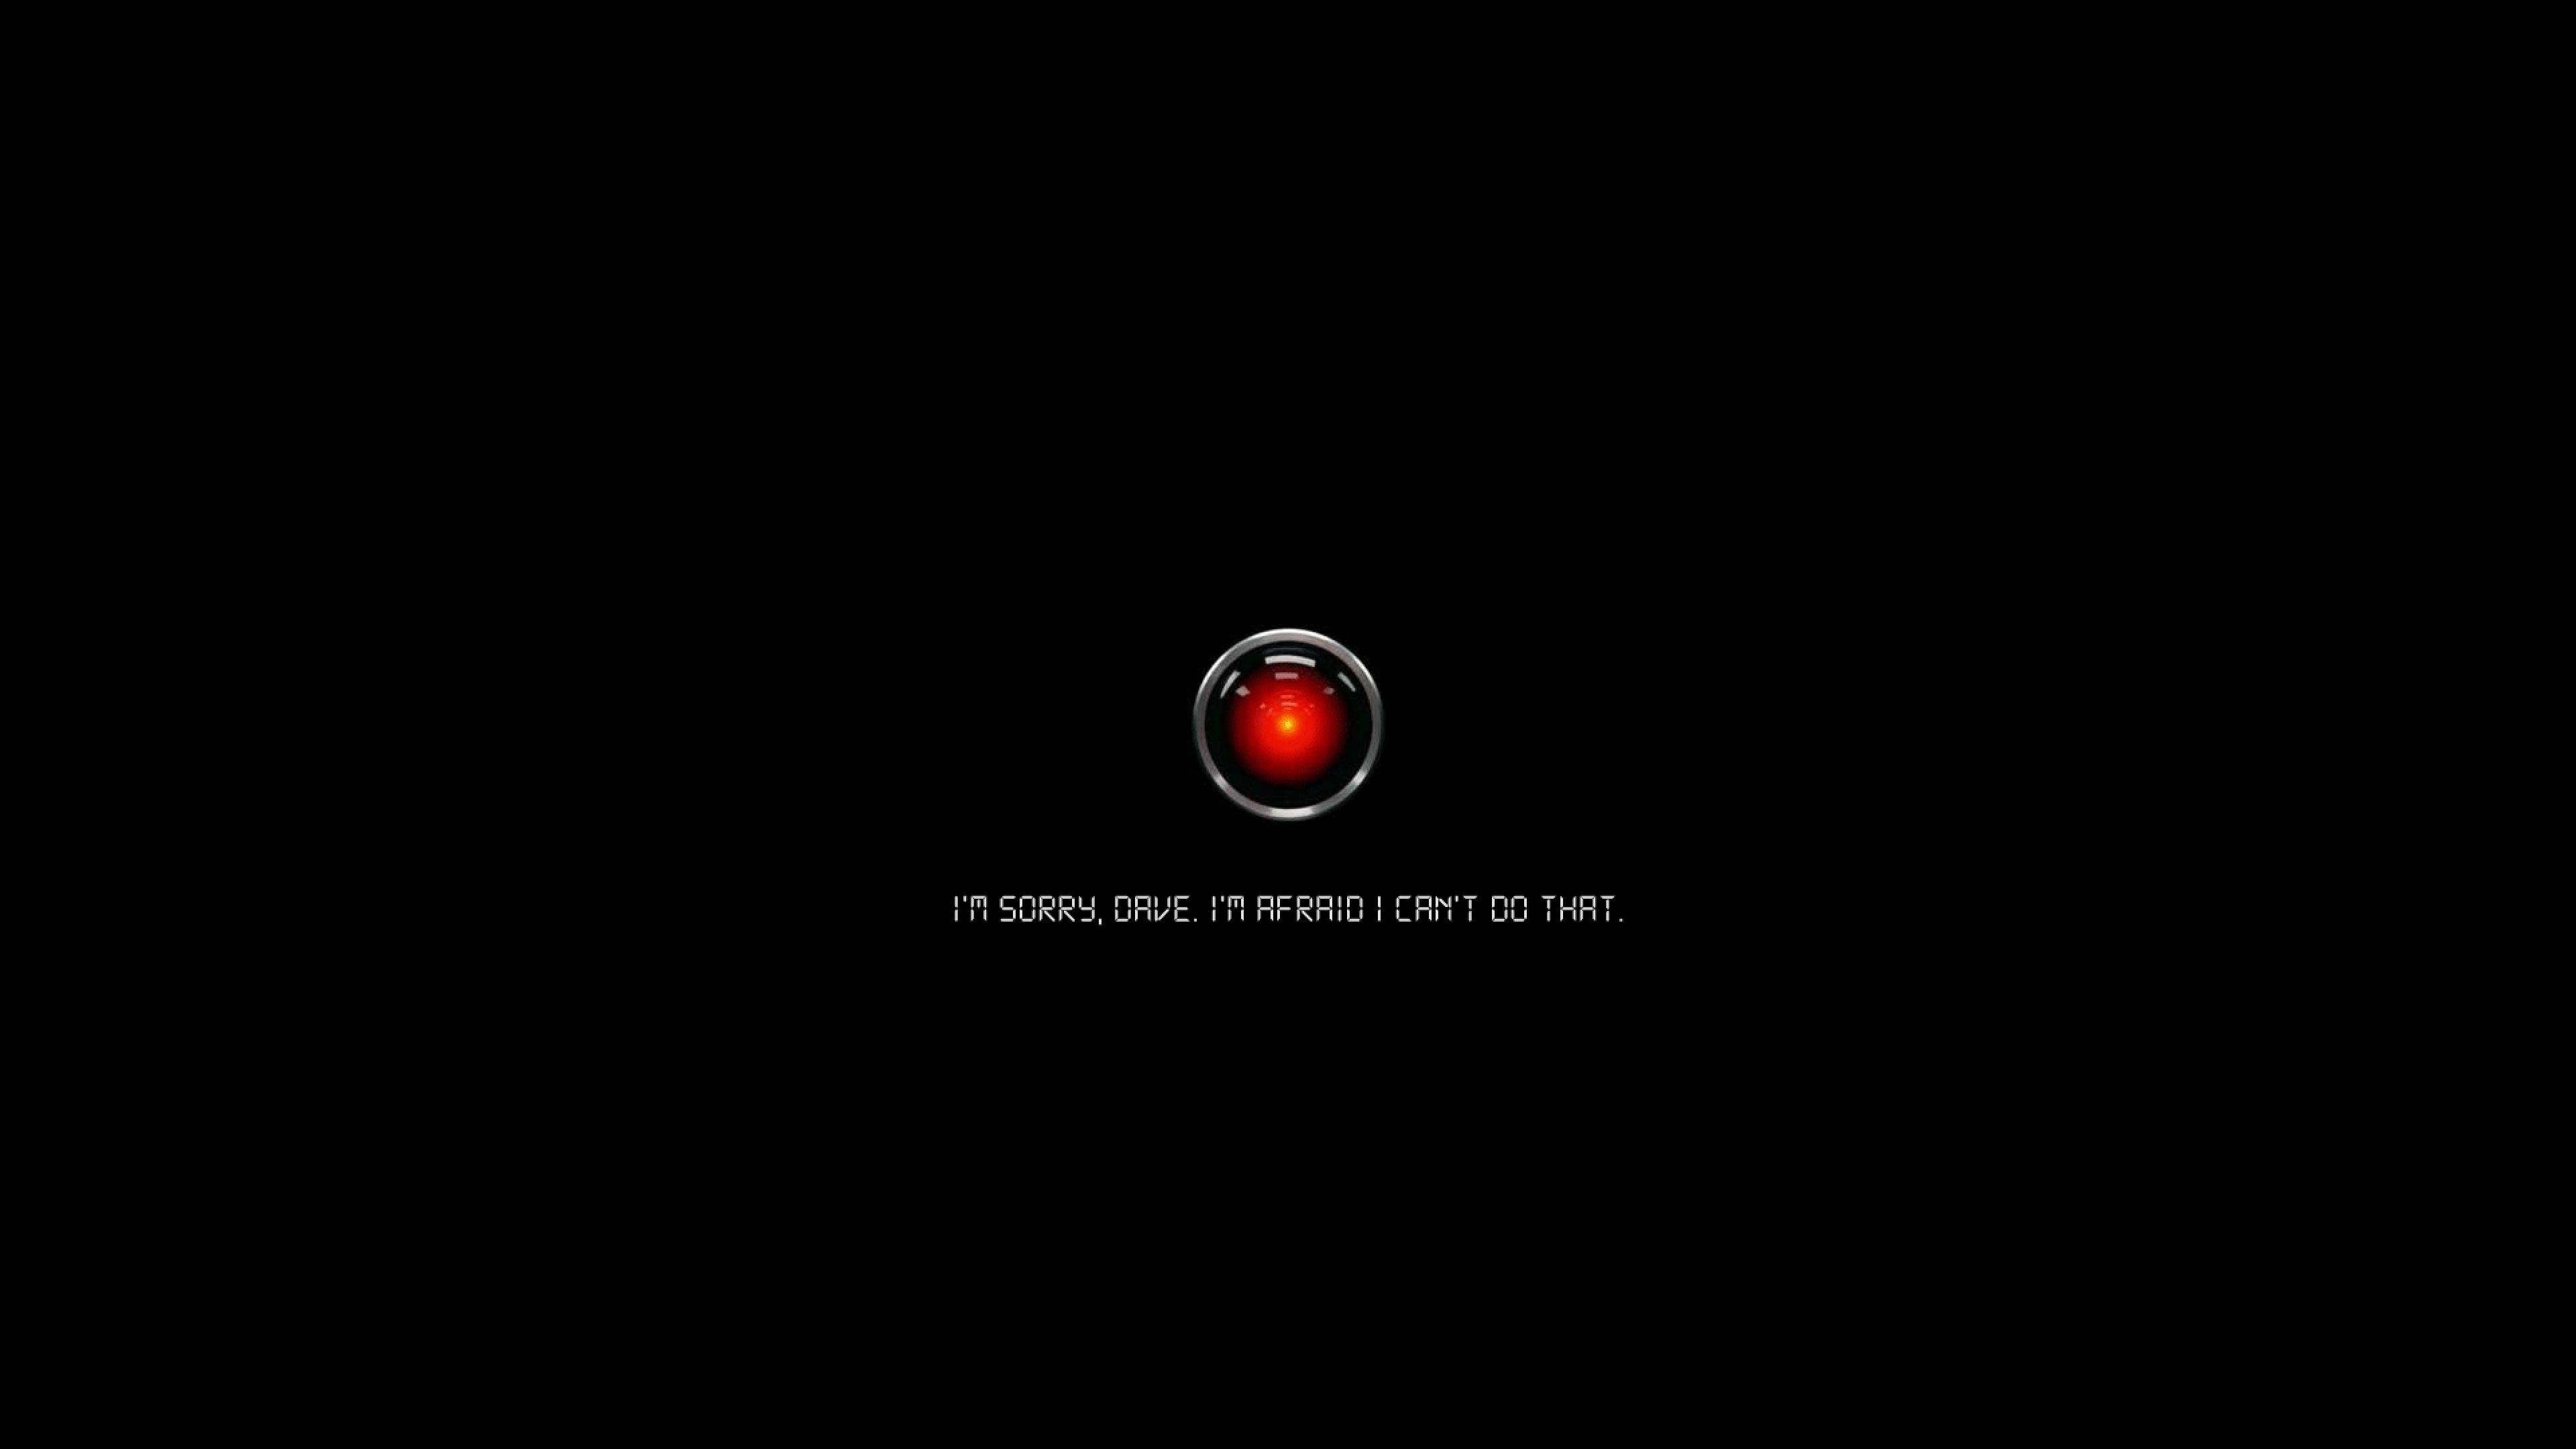 3840x2160 2001 a space odyssey hal 9000 Ultra or Dual High Definition: 2560x1440 .